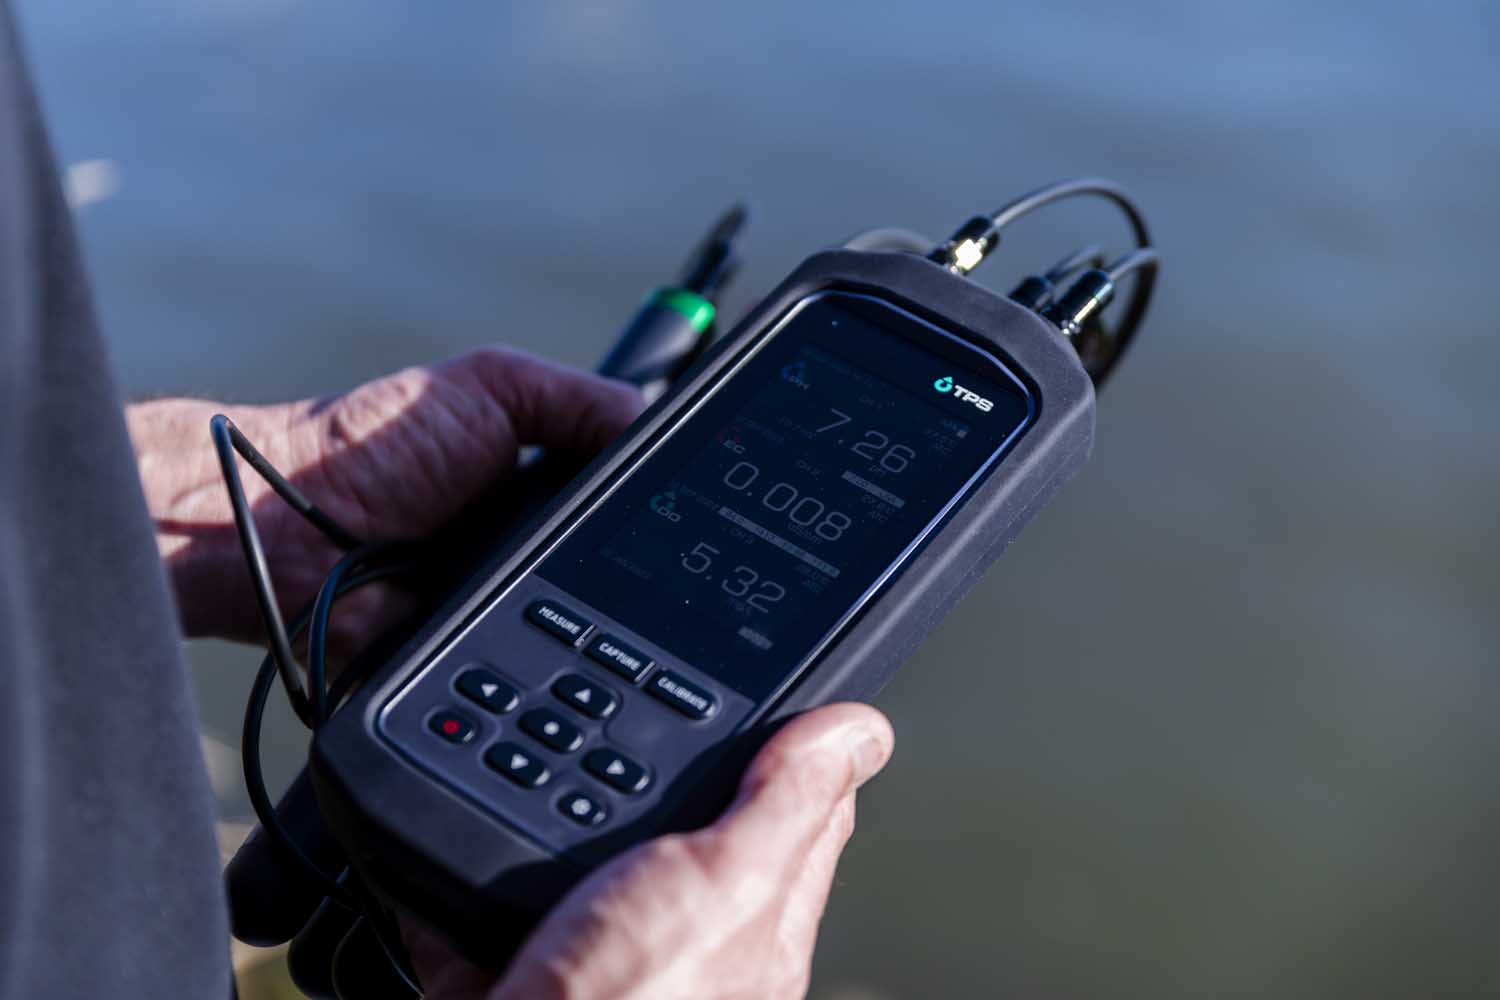 The TPS Ranger is the Ultimate Water Quality Measurement Solution.